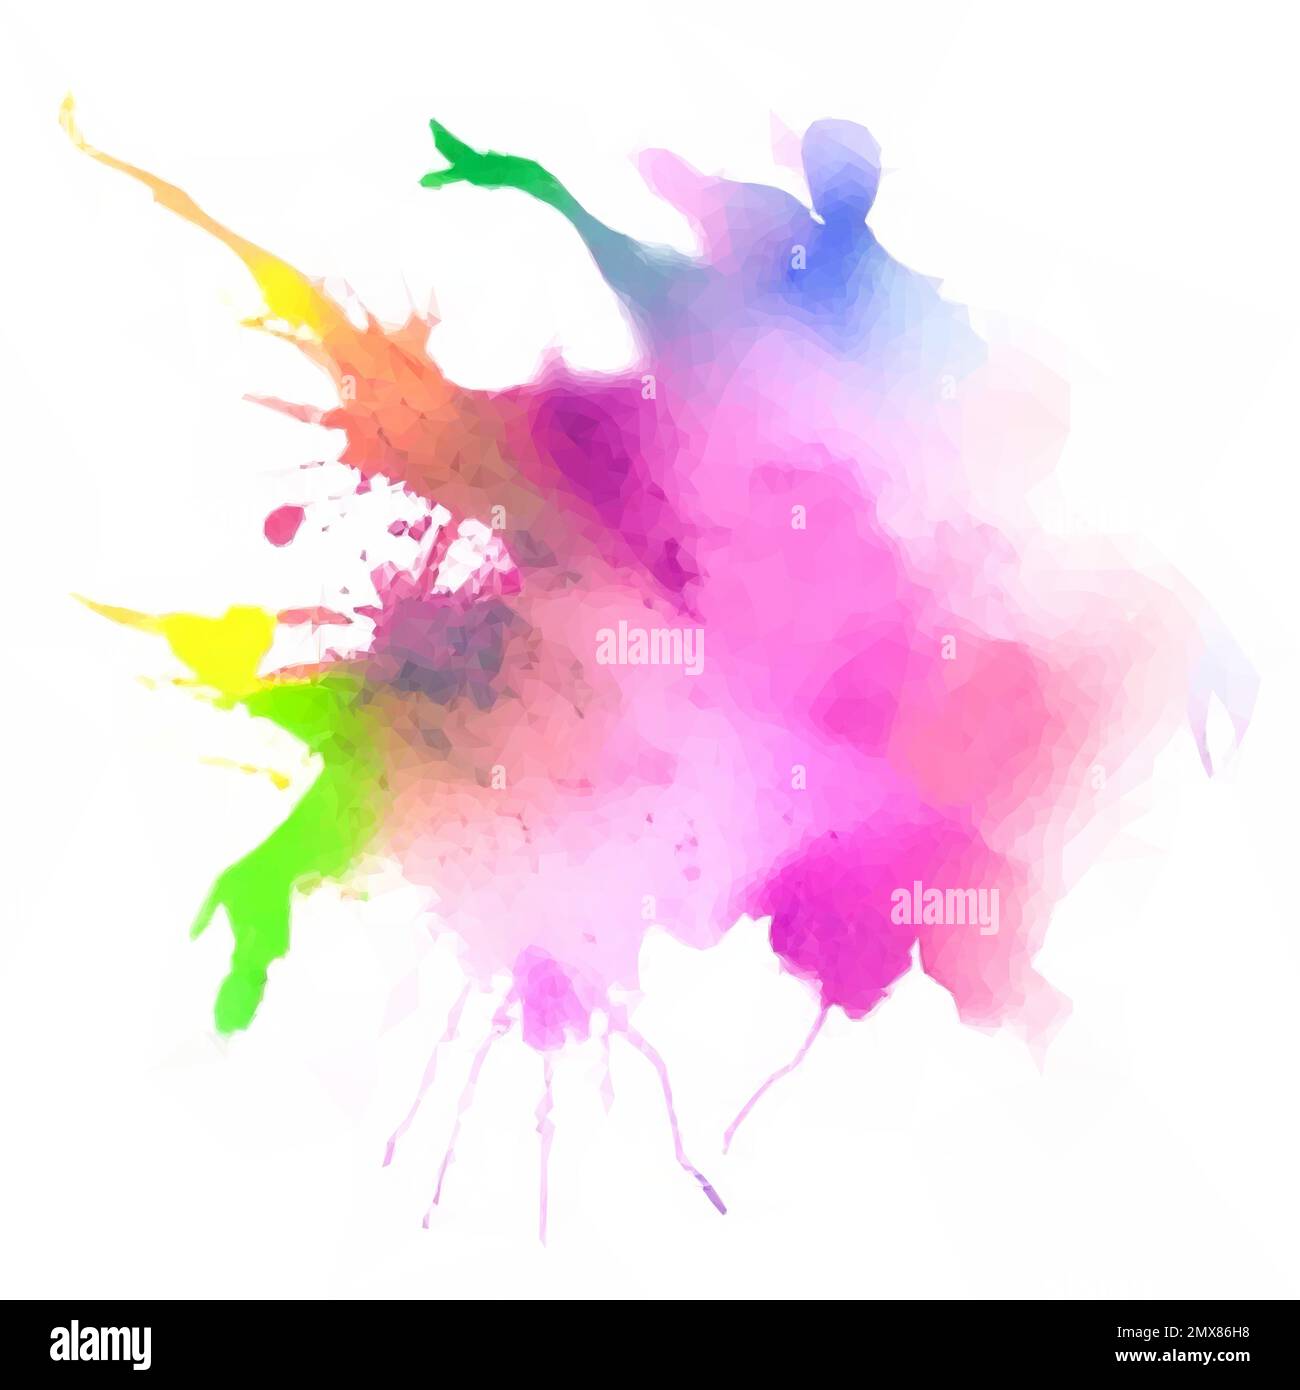 Blob of watercolor rainbow colors. Mixed media vector consists of watercolor illustration and low poly art. Stock Vector